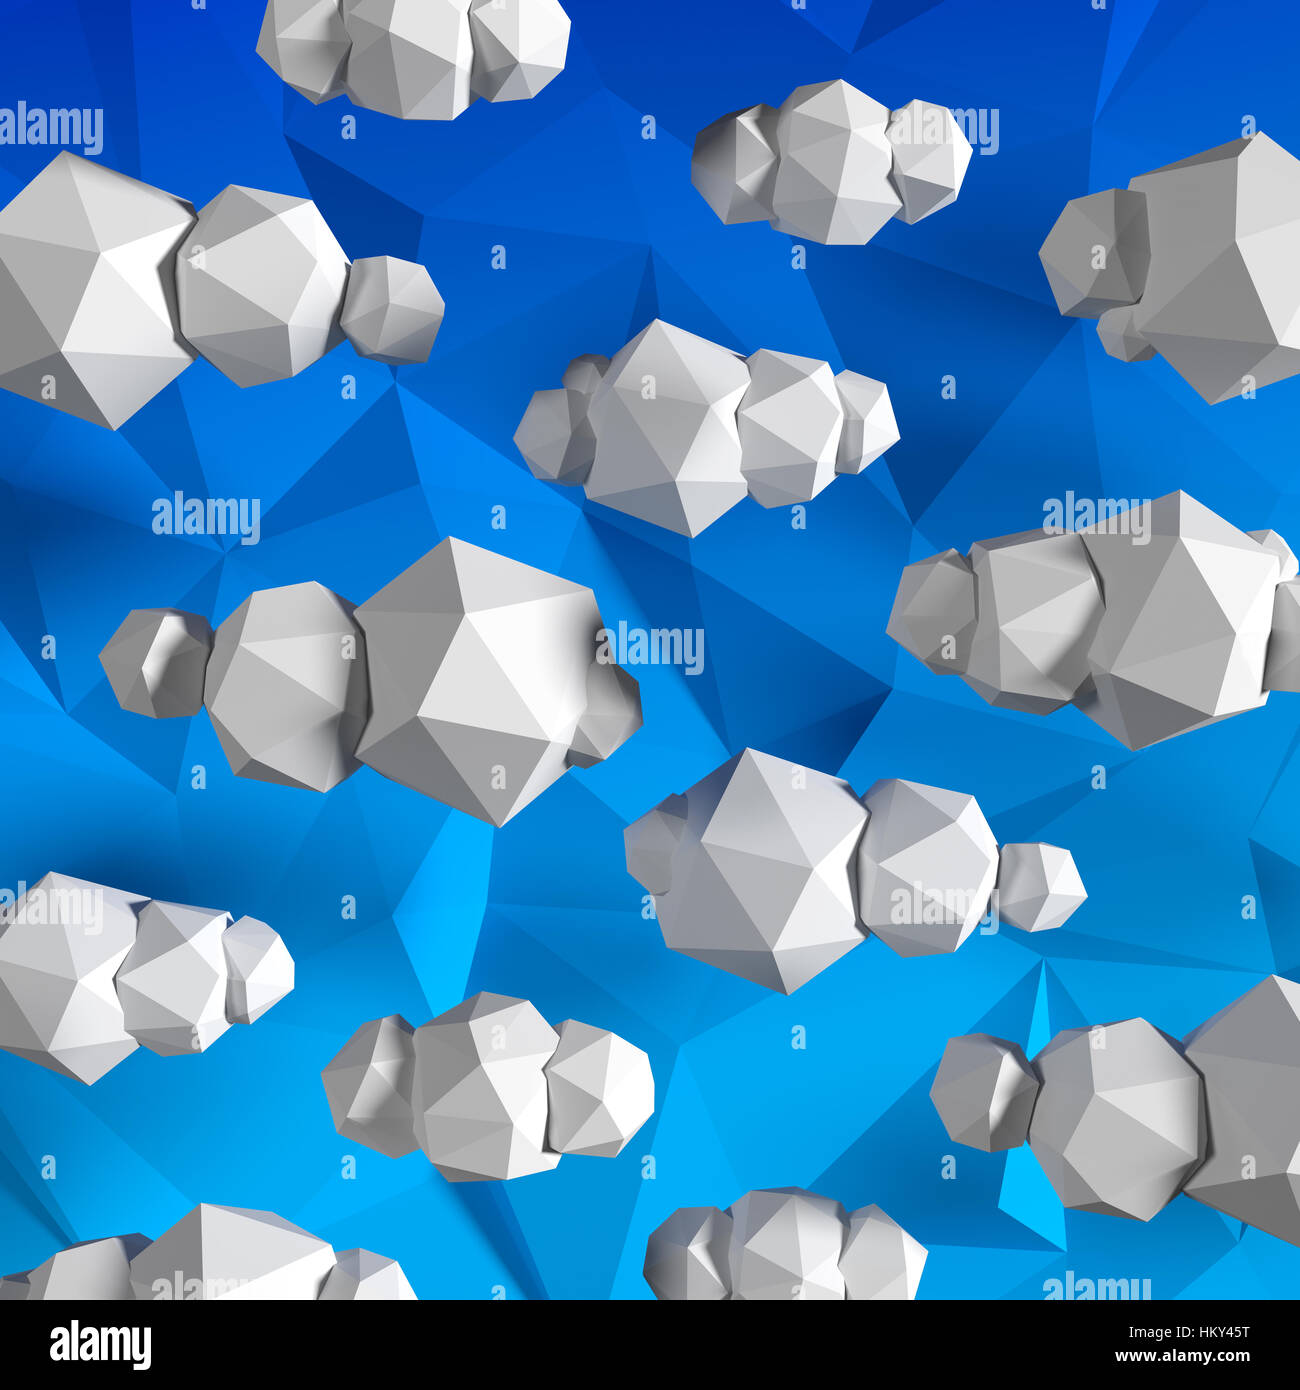 Low poly clouds on the blue triangle sky. 3D render image. Stock Photo